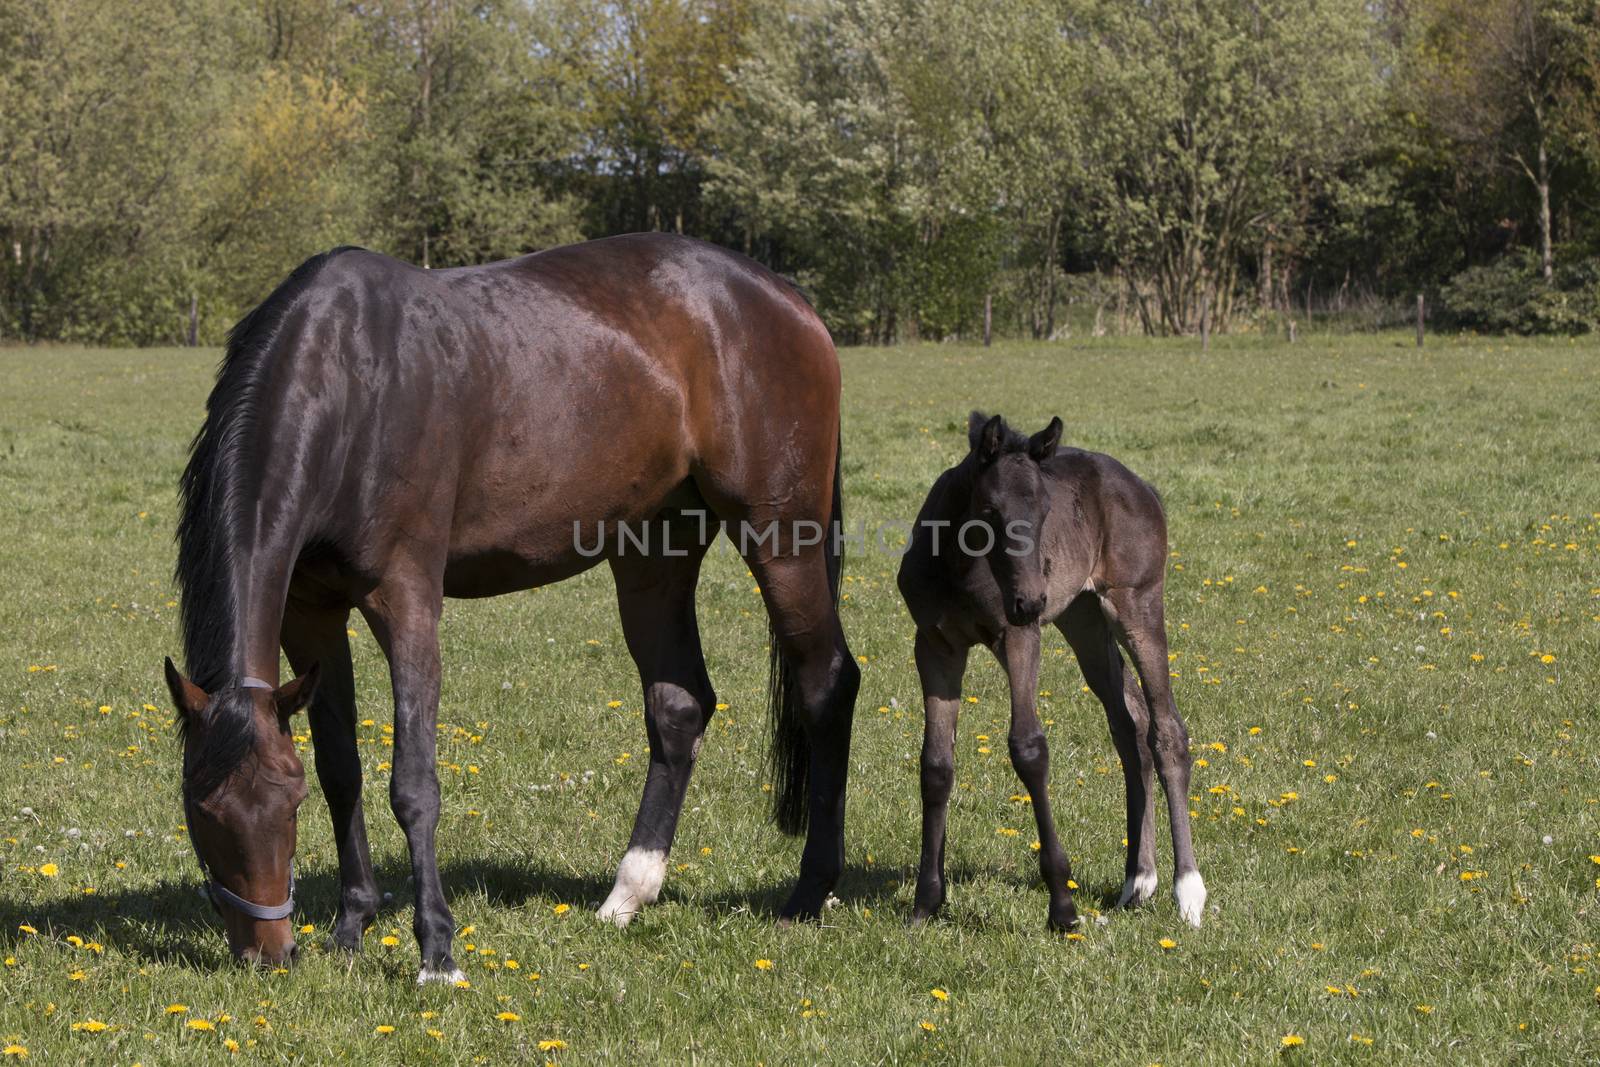 Mare and foal standing in grassland